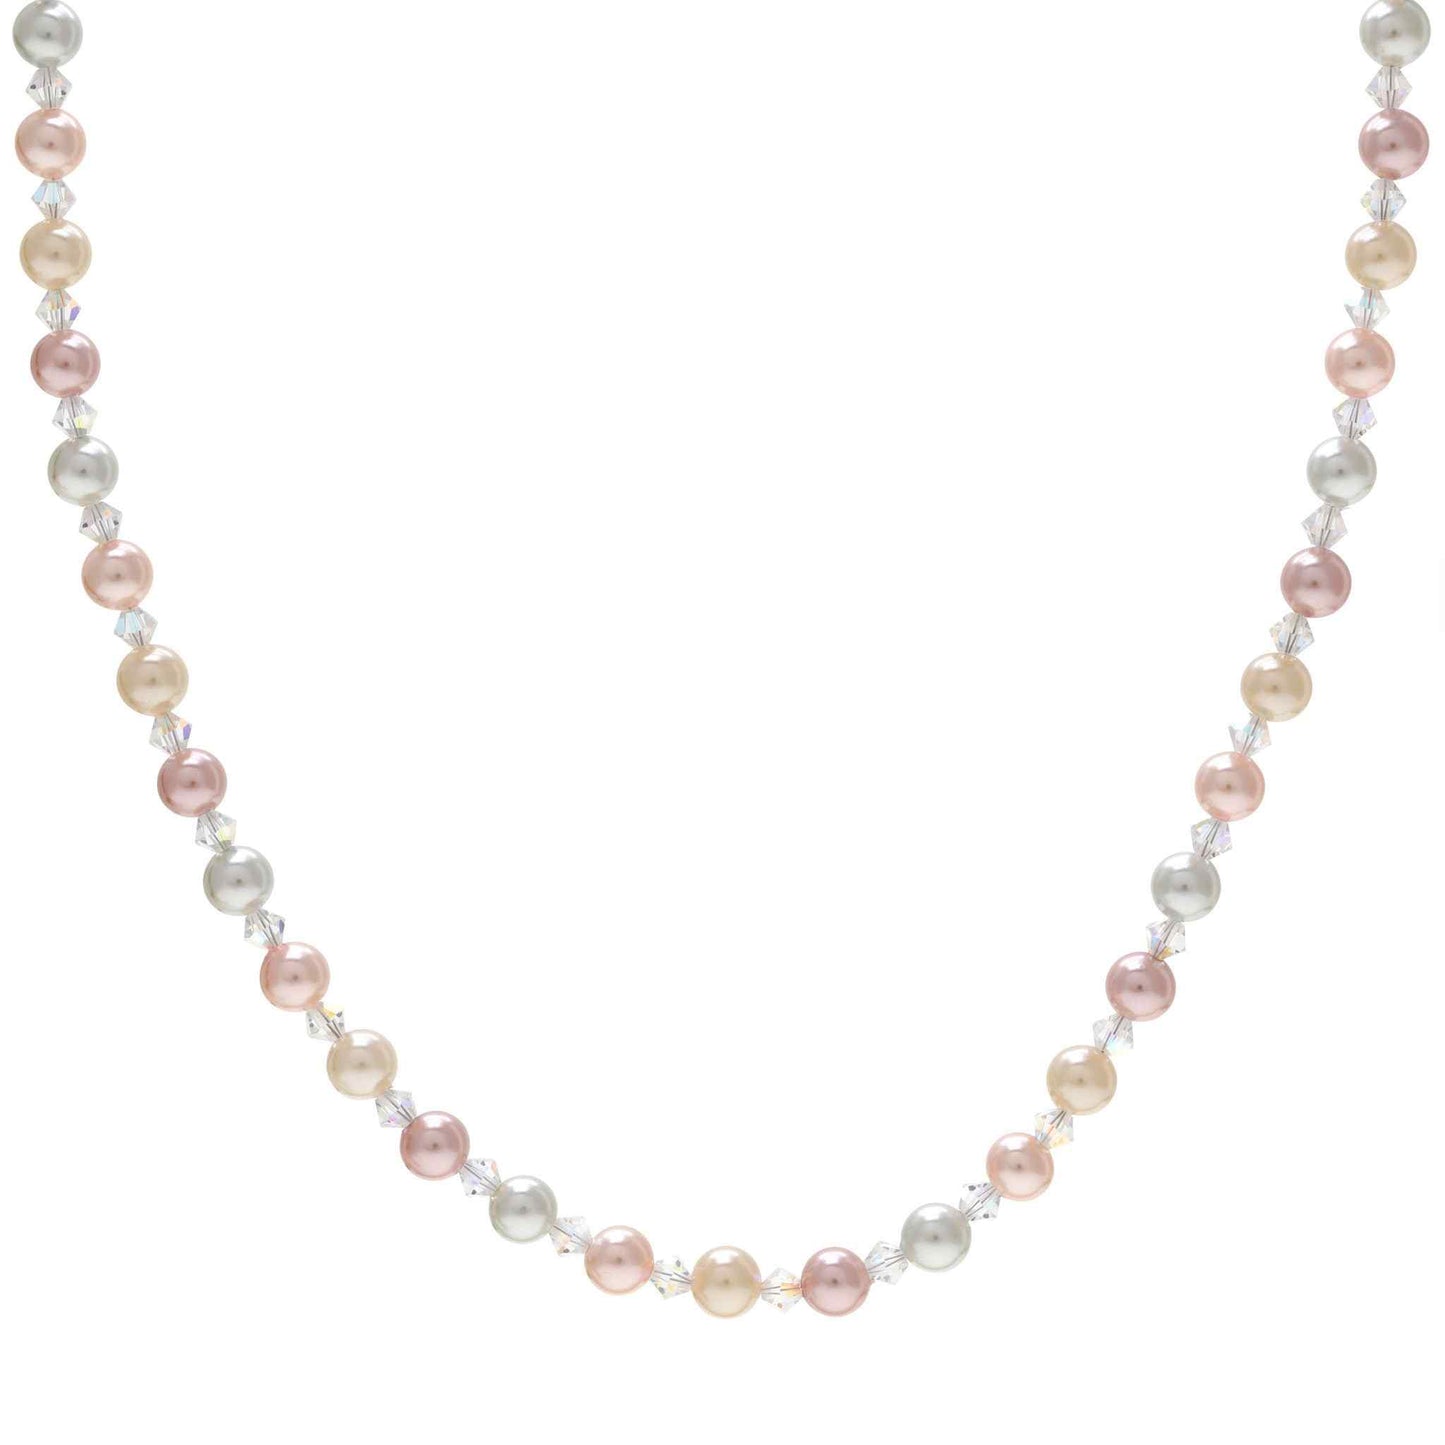 A multicolored glass pearl necklace displayed on a neutral white background.